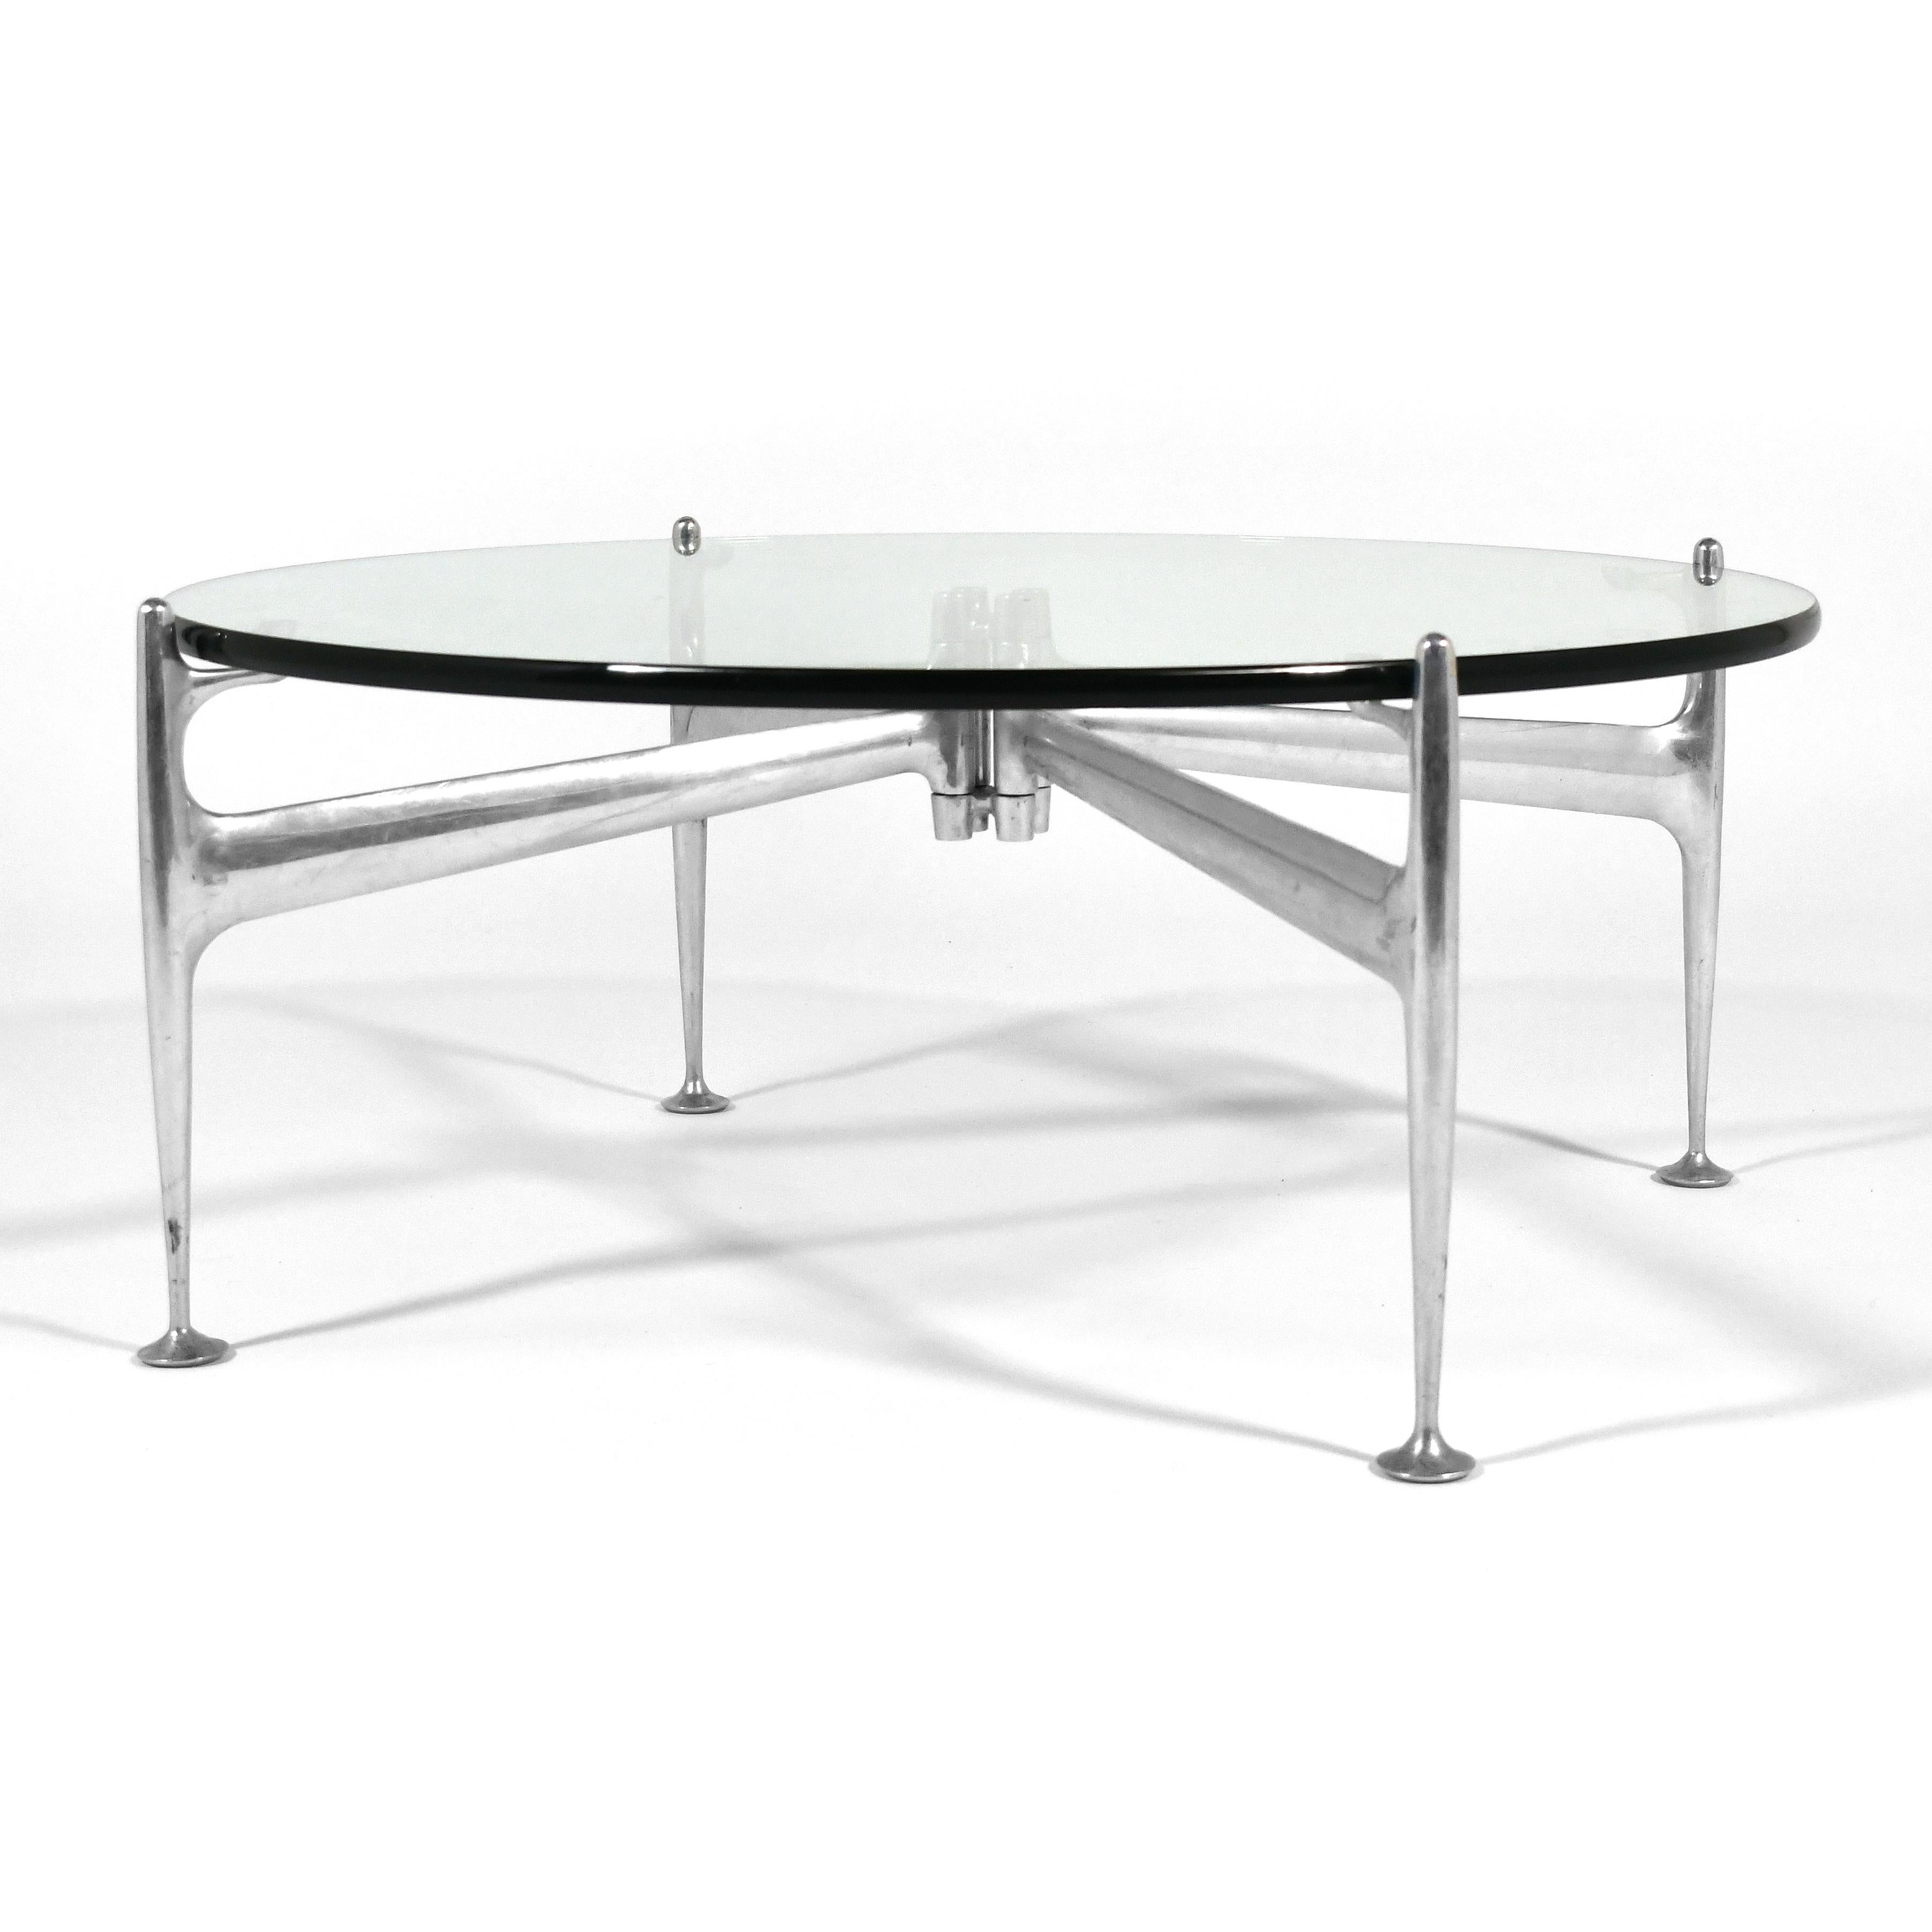 Aluminum Alexander Girard Coffee Table by Herman Miller For Sale